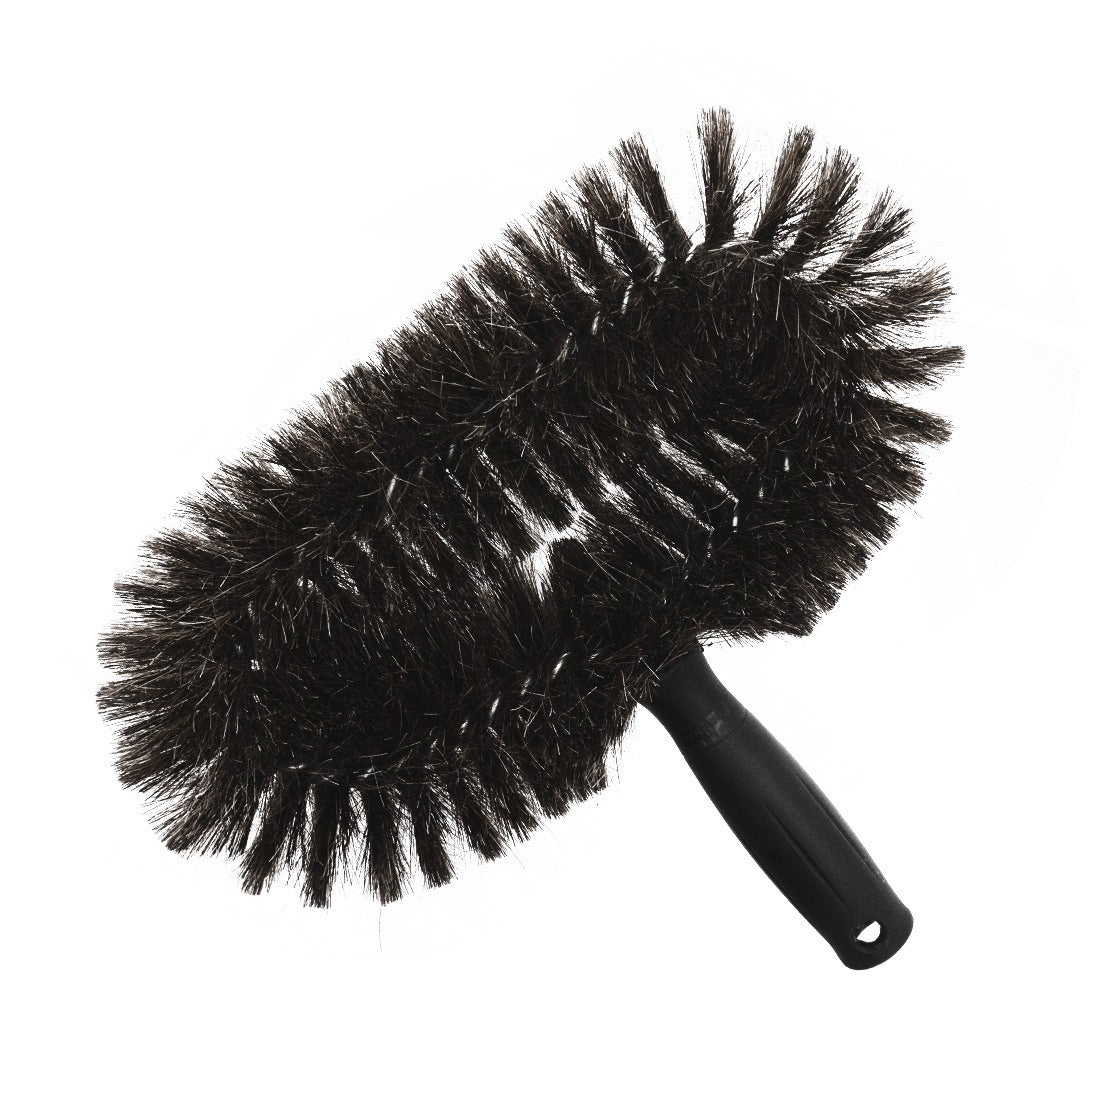 Unger StarDuster Pipe Brush Duster, 11-in, Black Handle - Curved